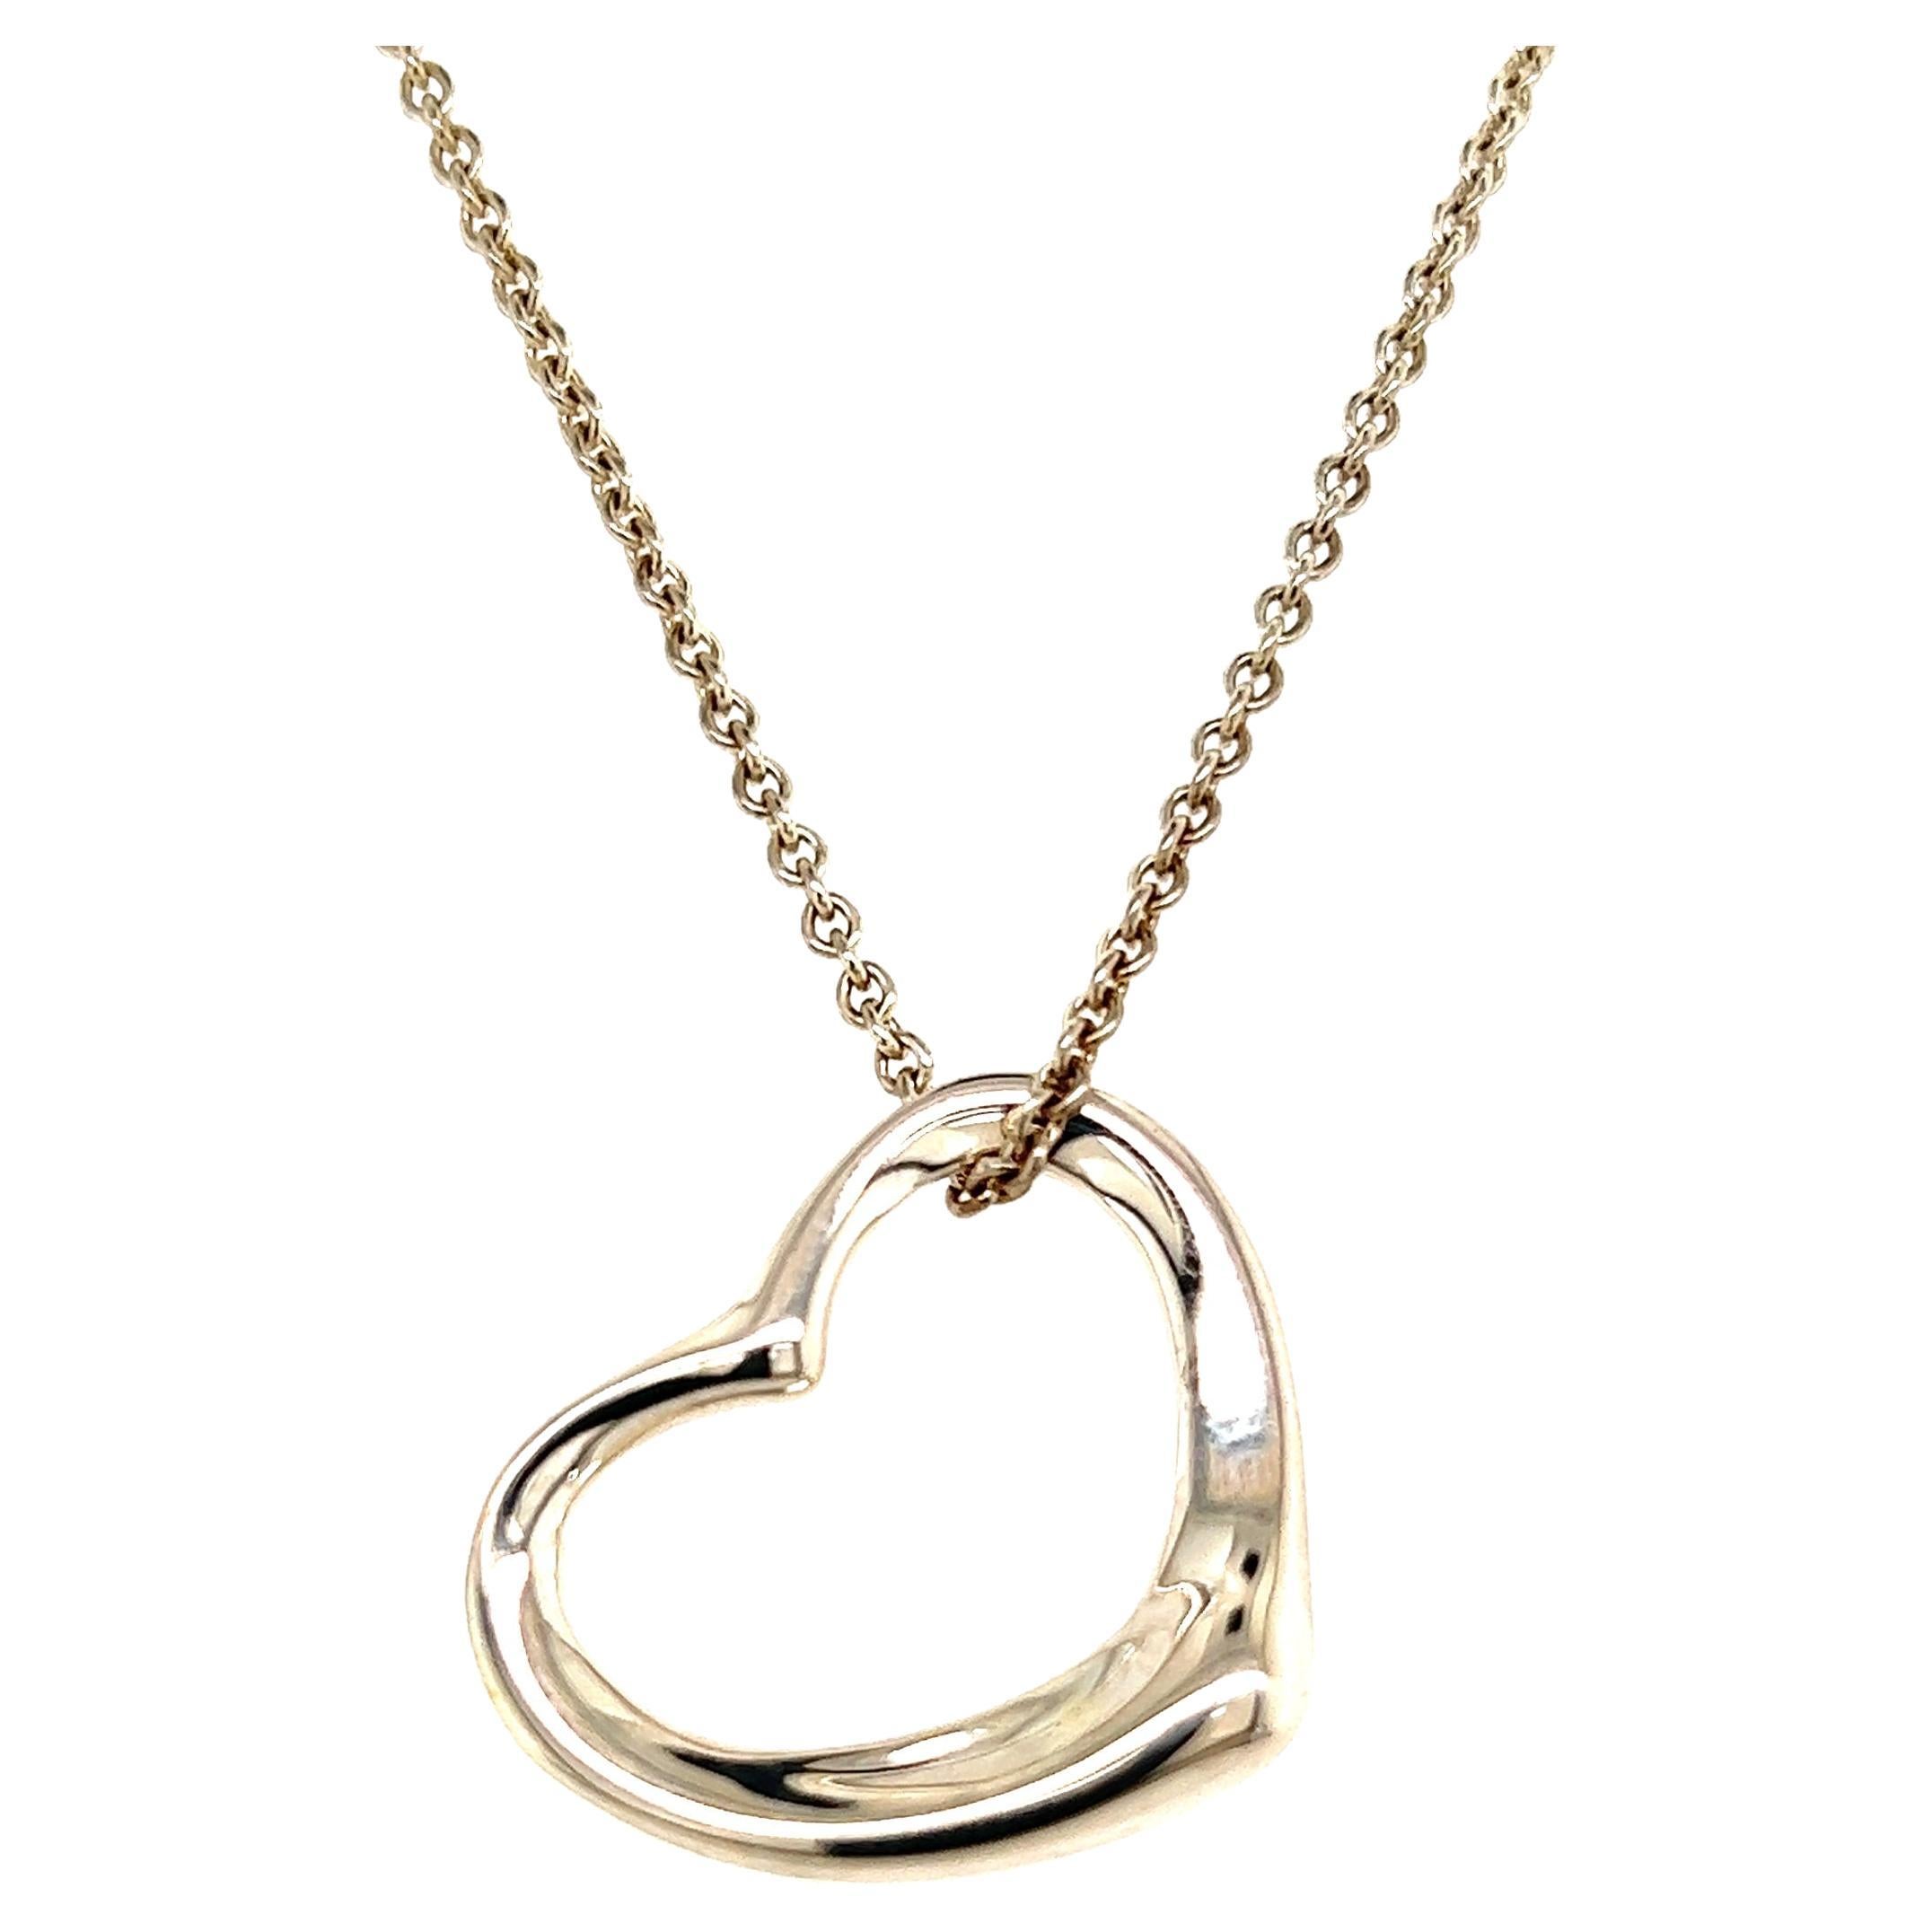 Tiffany & Co Estate Large Heart Pendtiffaant Silver Necklace by Elsa Peretti